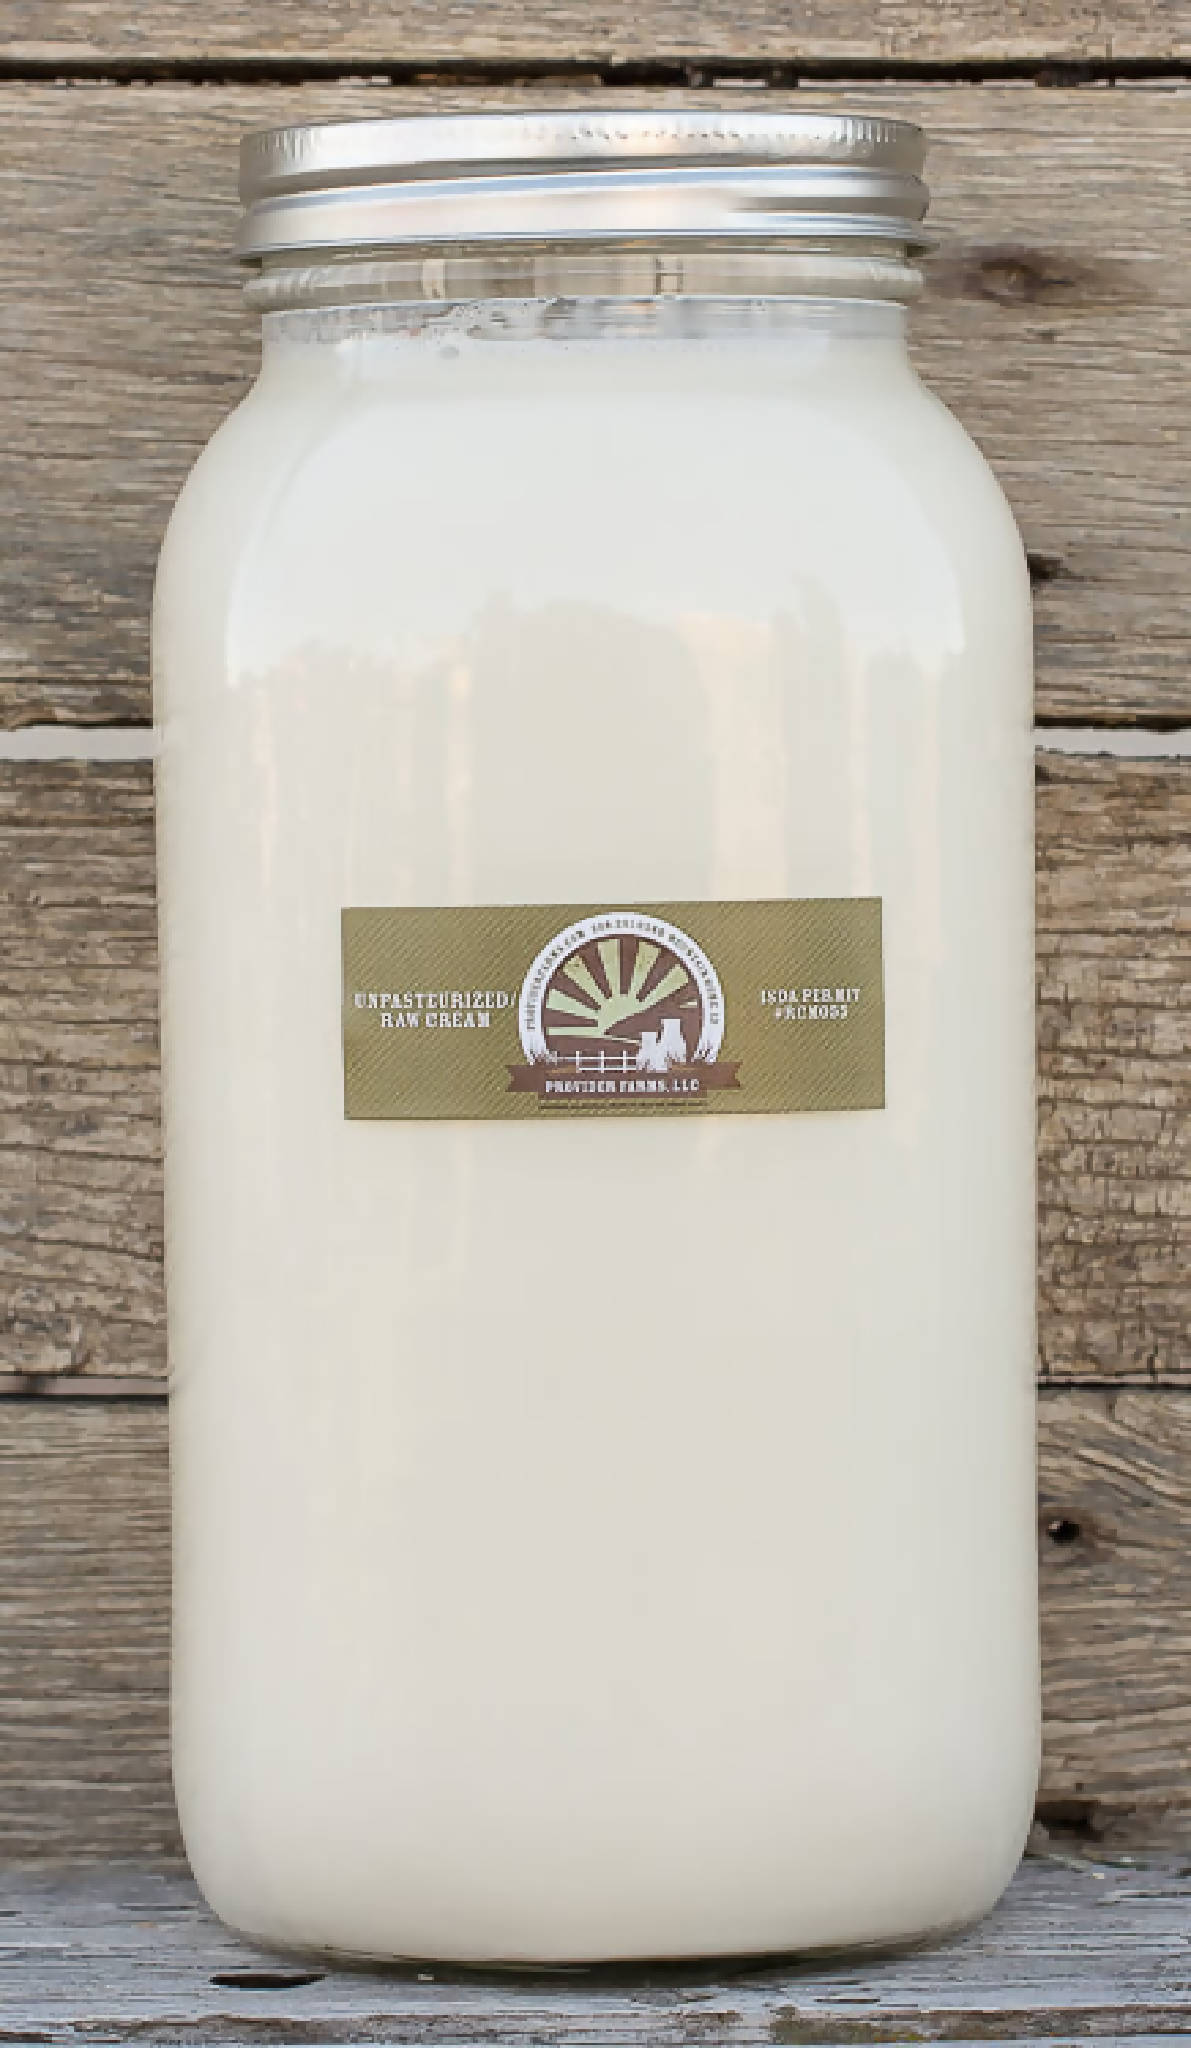 Raw Cream | Grass-Fed Jersey Cows Unpasteurized